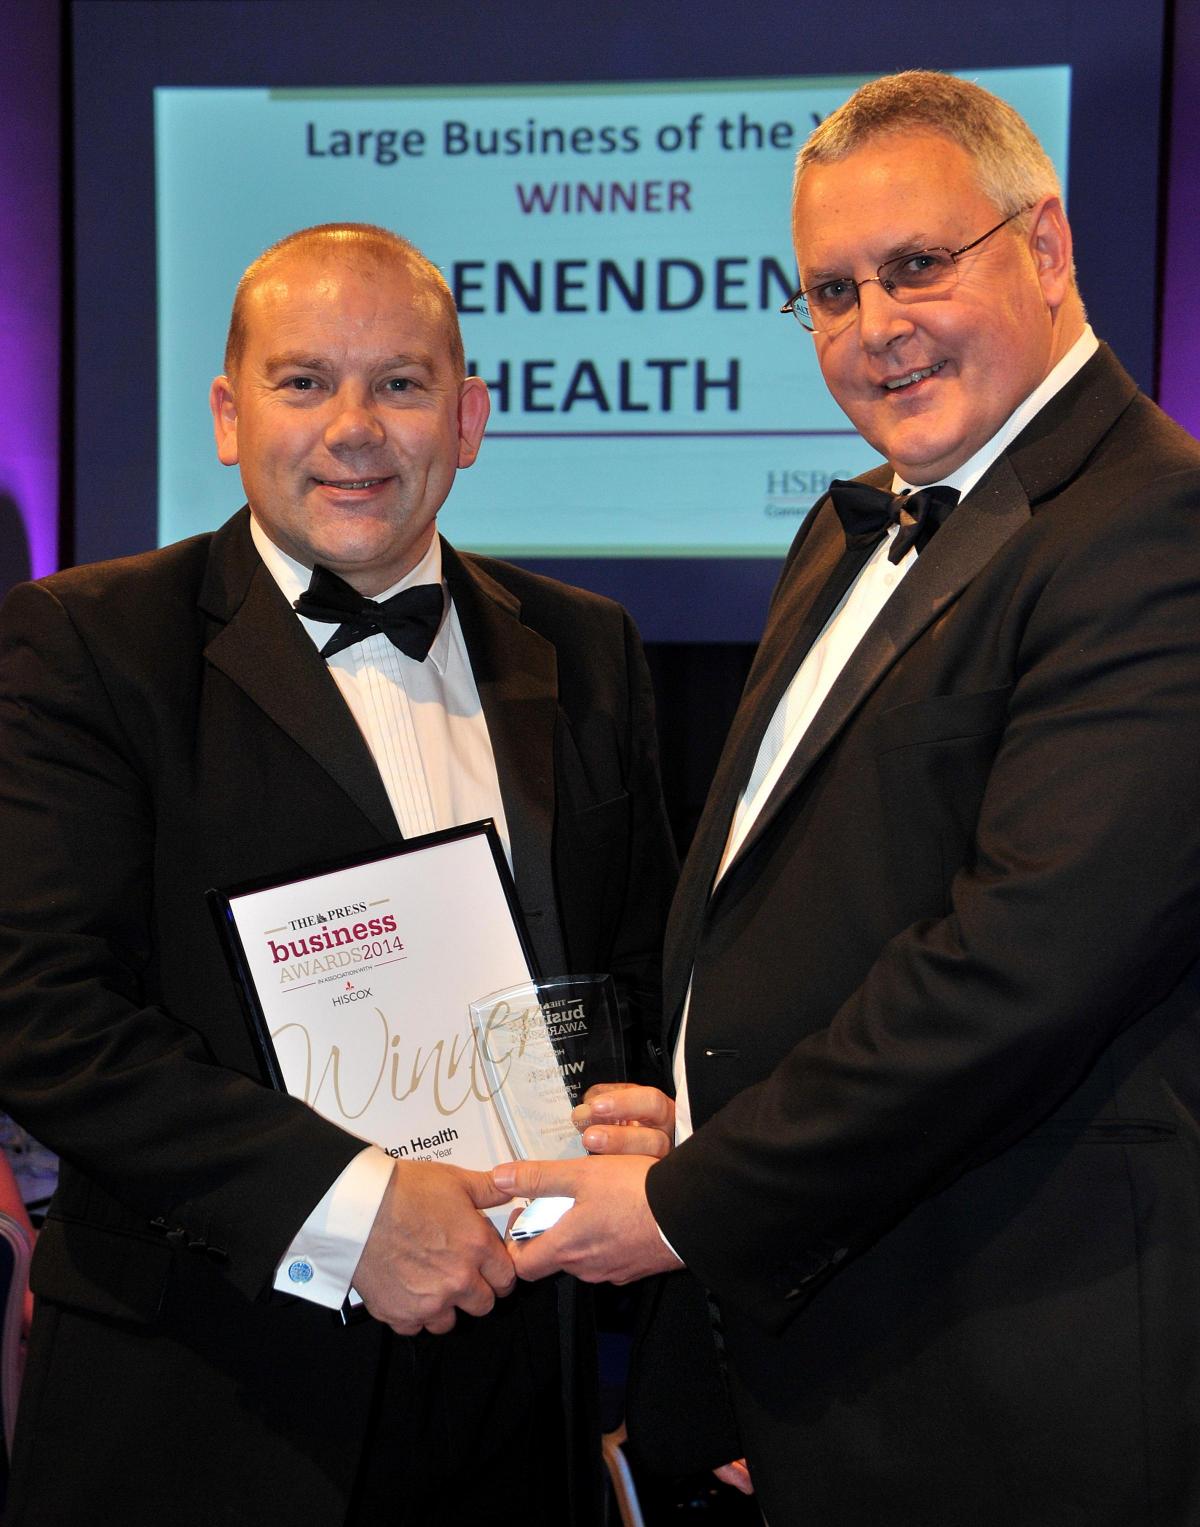  Jonathan Rutter from HSBC North Yorkshire & Humber Corporate Banking, right, presents the award for Large Business of the Year to Benenden Health’s chief executive Marc Bell